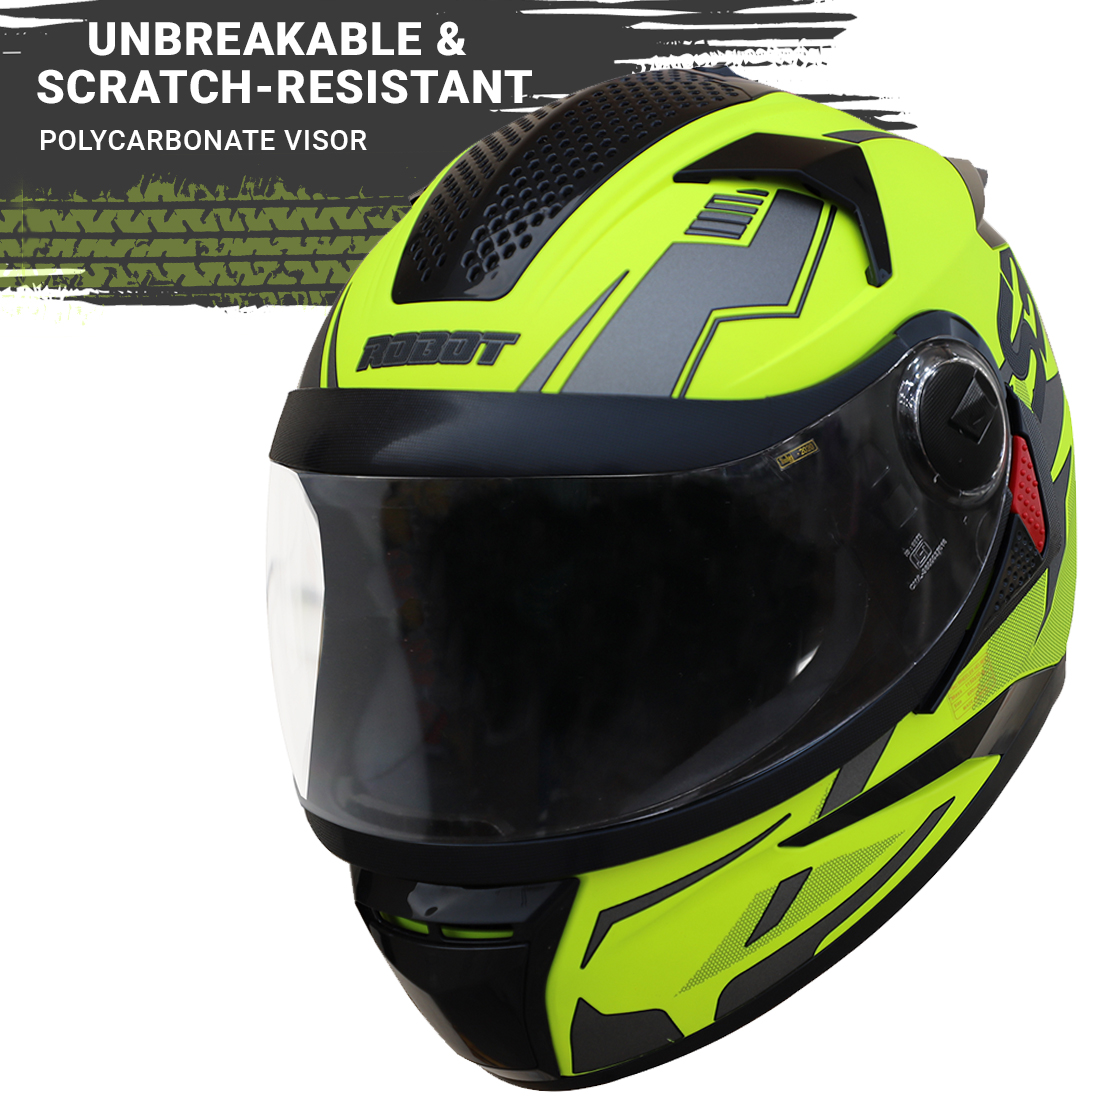 Steelbird SBH-17 Terminator ISI Certified Full Face Graphic Helmet (Glossy Fluo Neon Grey With Clear Visor)